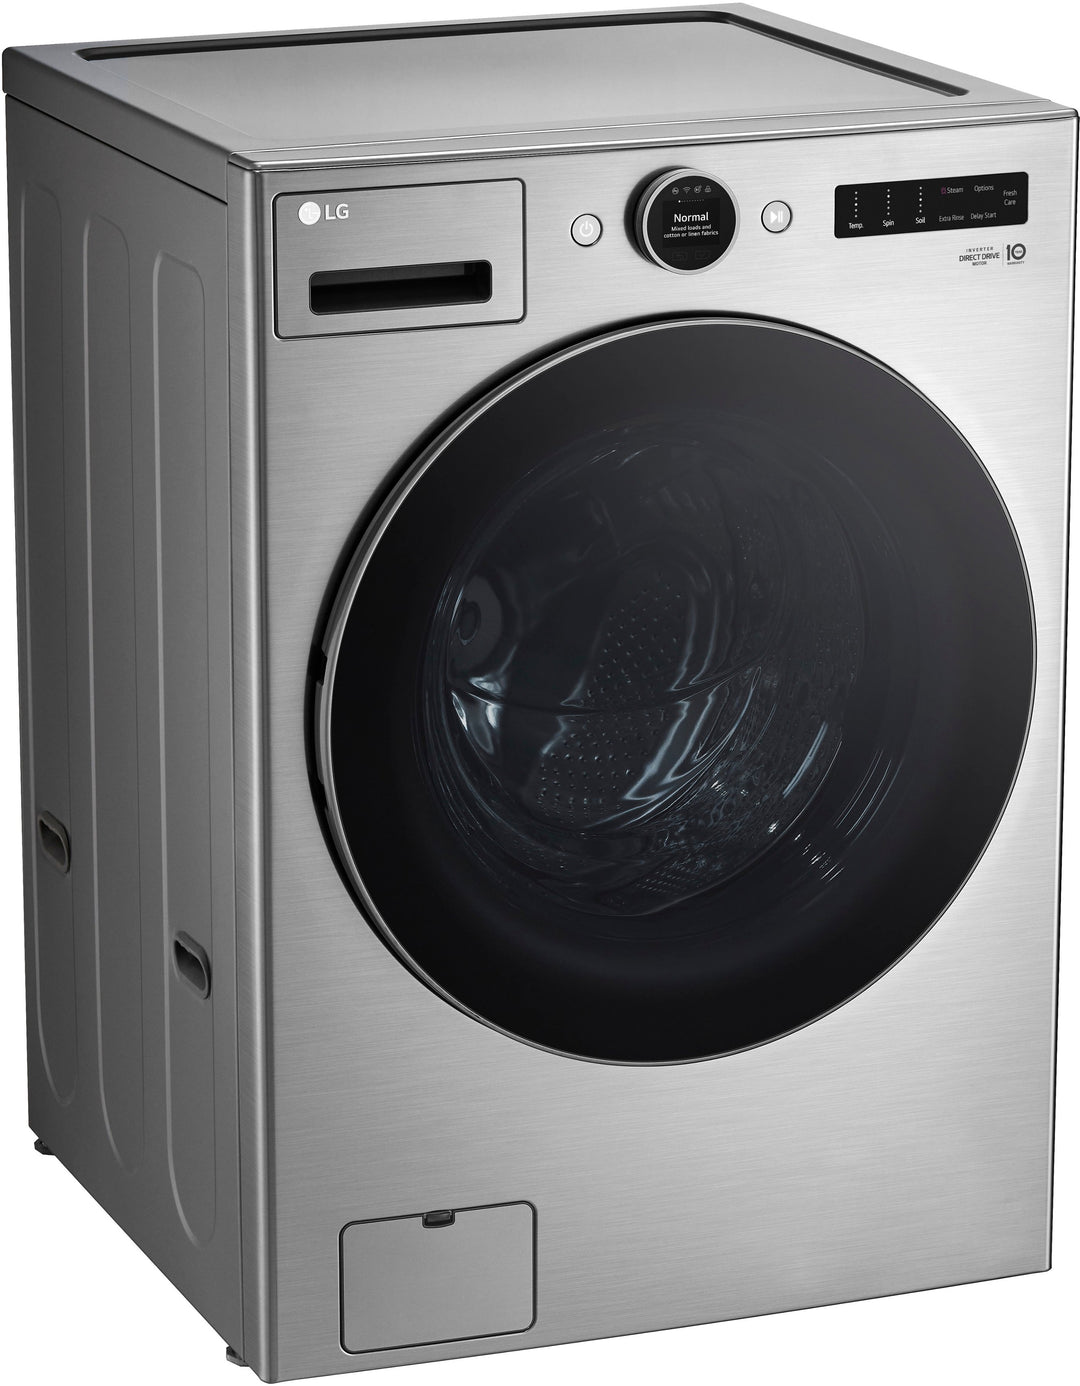 LG - 4.5 Cu. Ft. High-Efficiency Stackable Smart Front Load Washer with Steam and and ezDispense - Graphite Steel_7